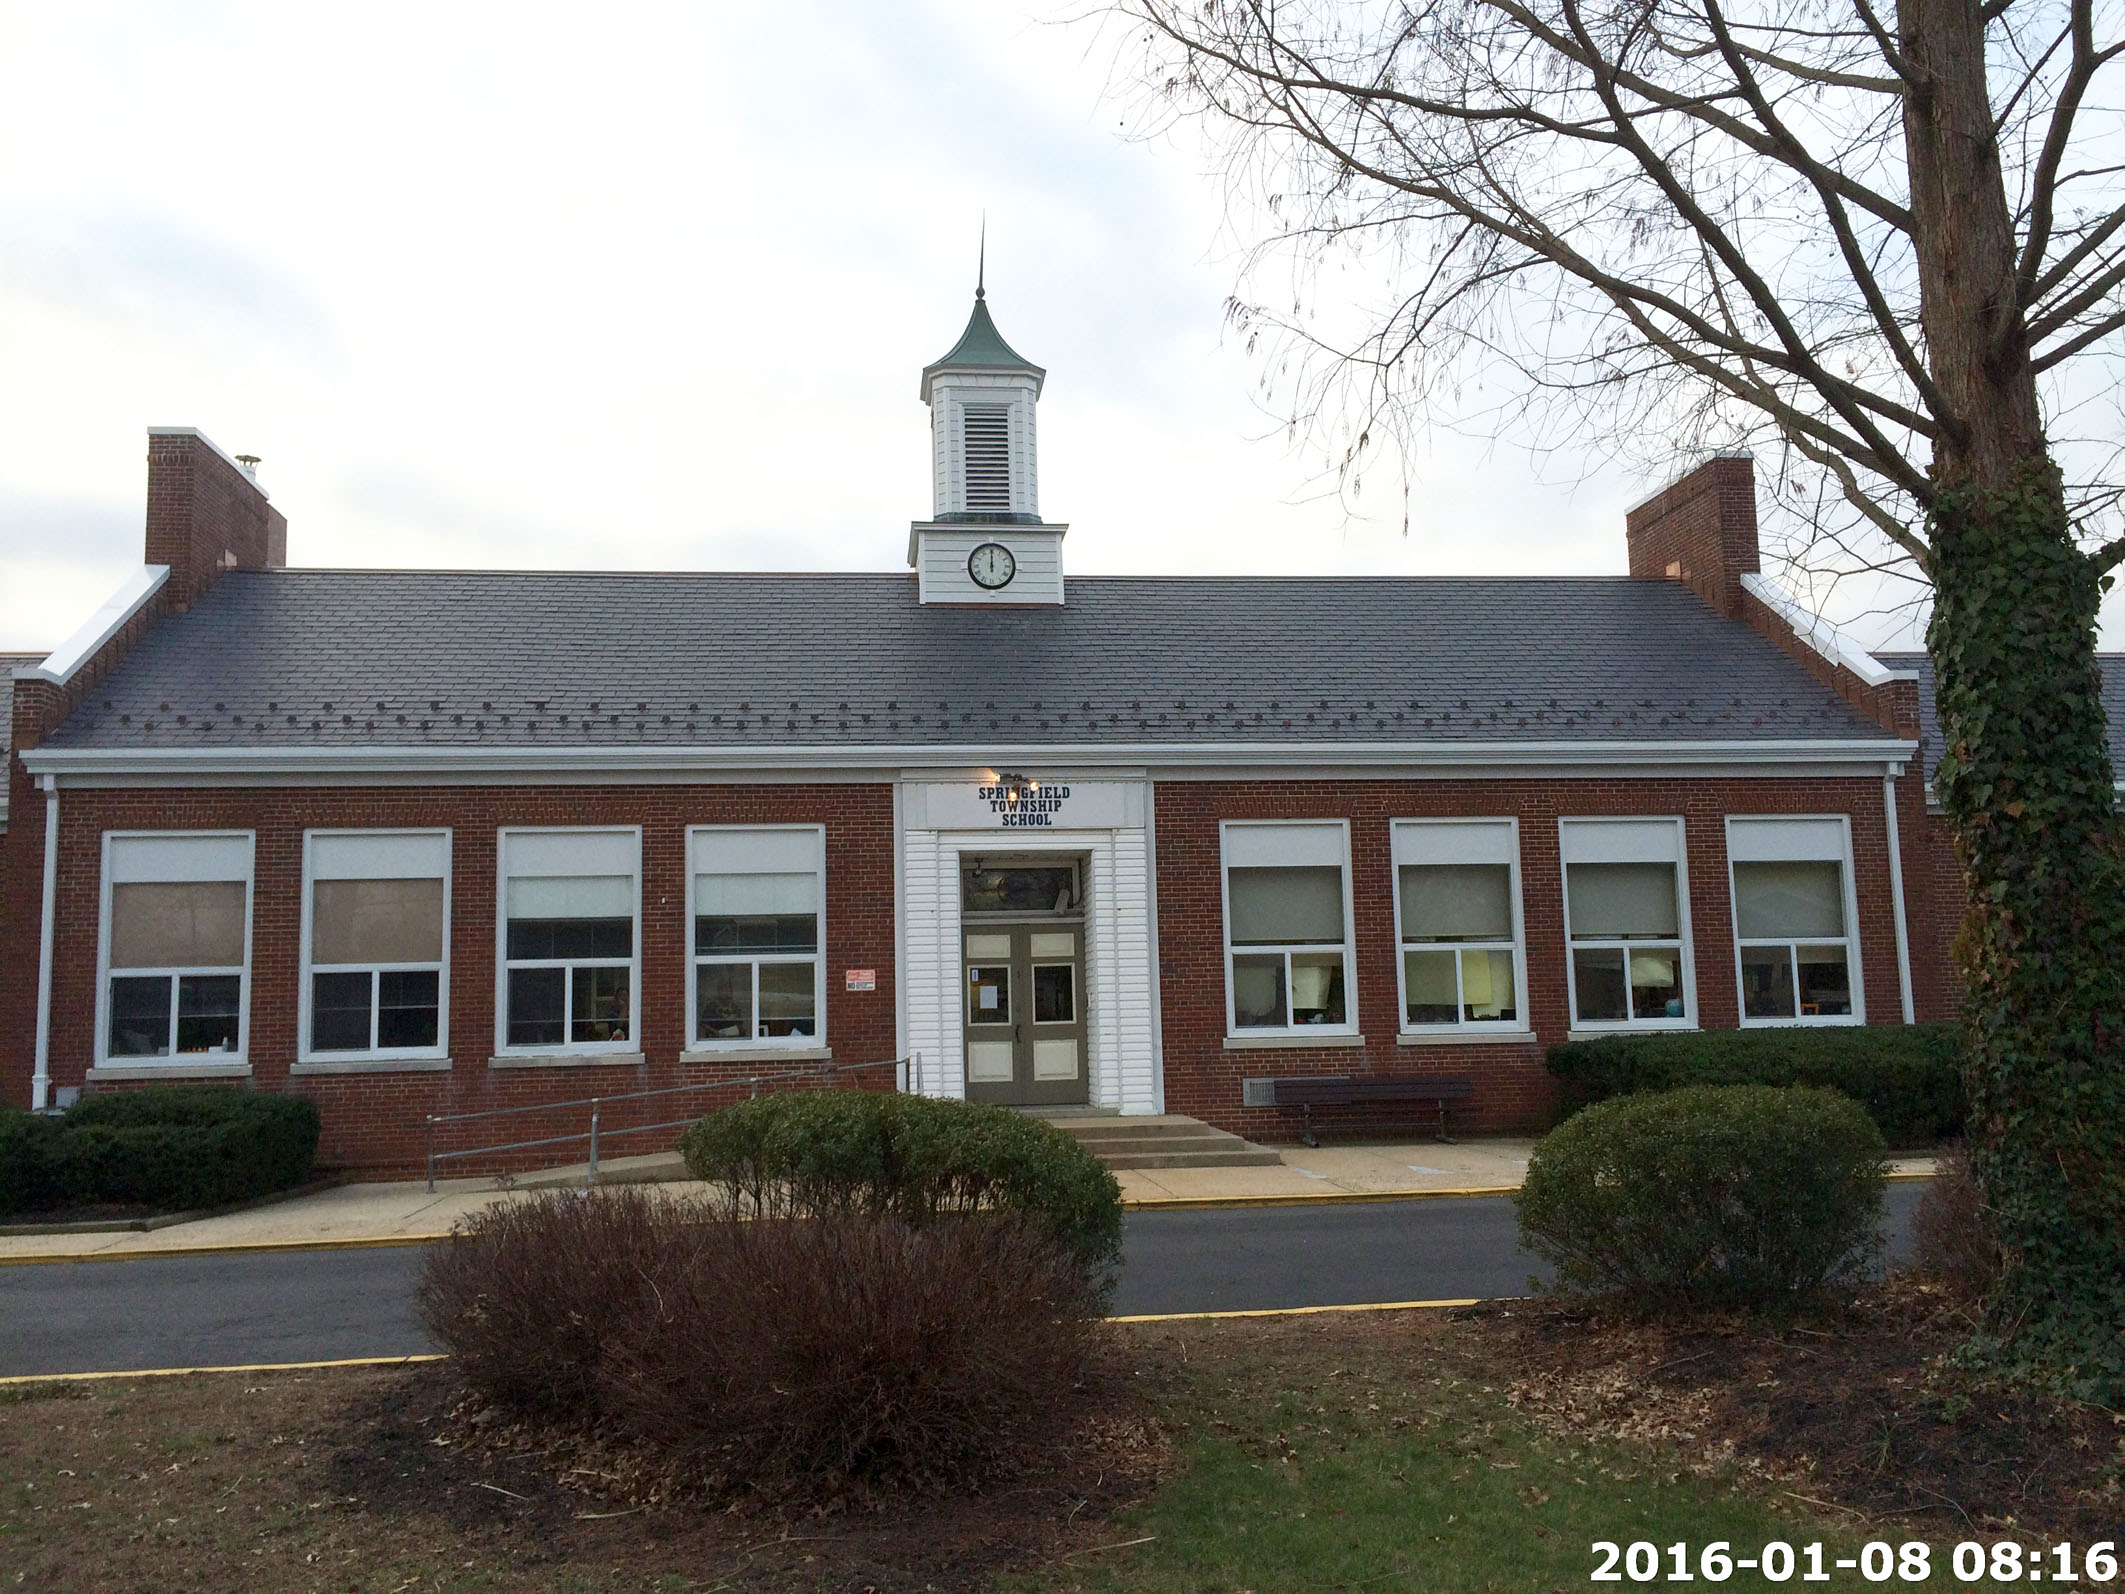 school district of springfield township, paper mill road, oreland, montgomery county, pa